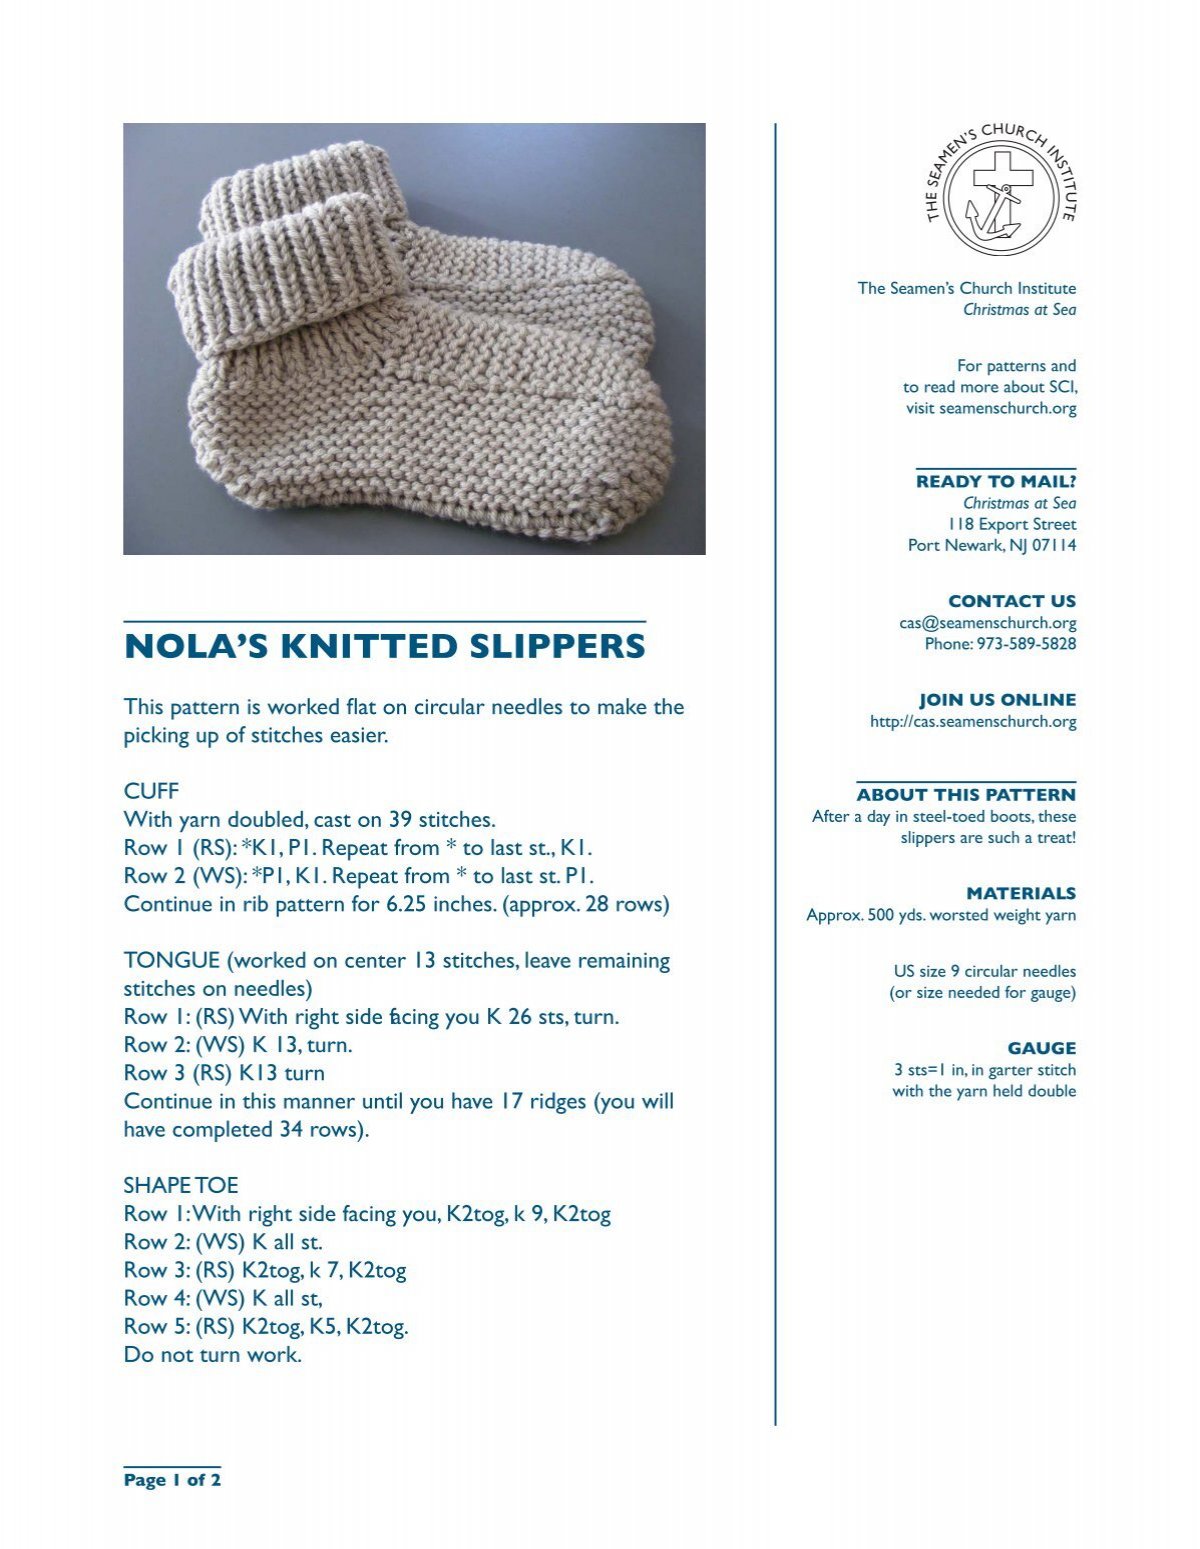 NOLA'S KNITTED SLIPPERS - The Seamen's 